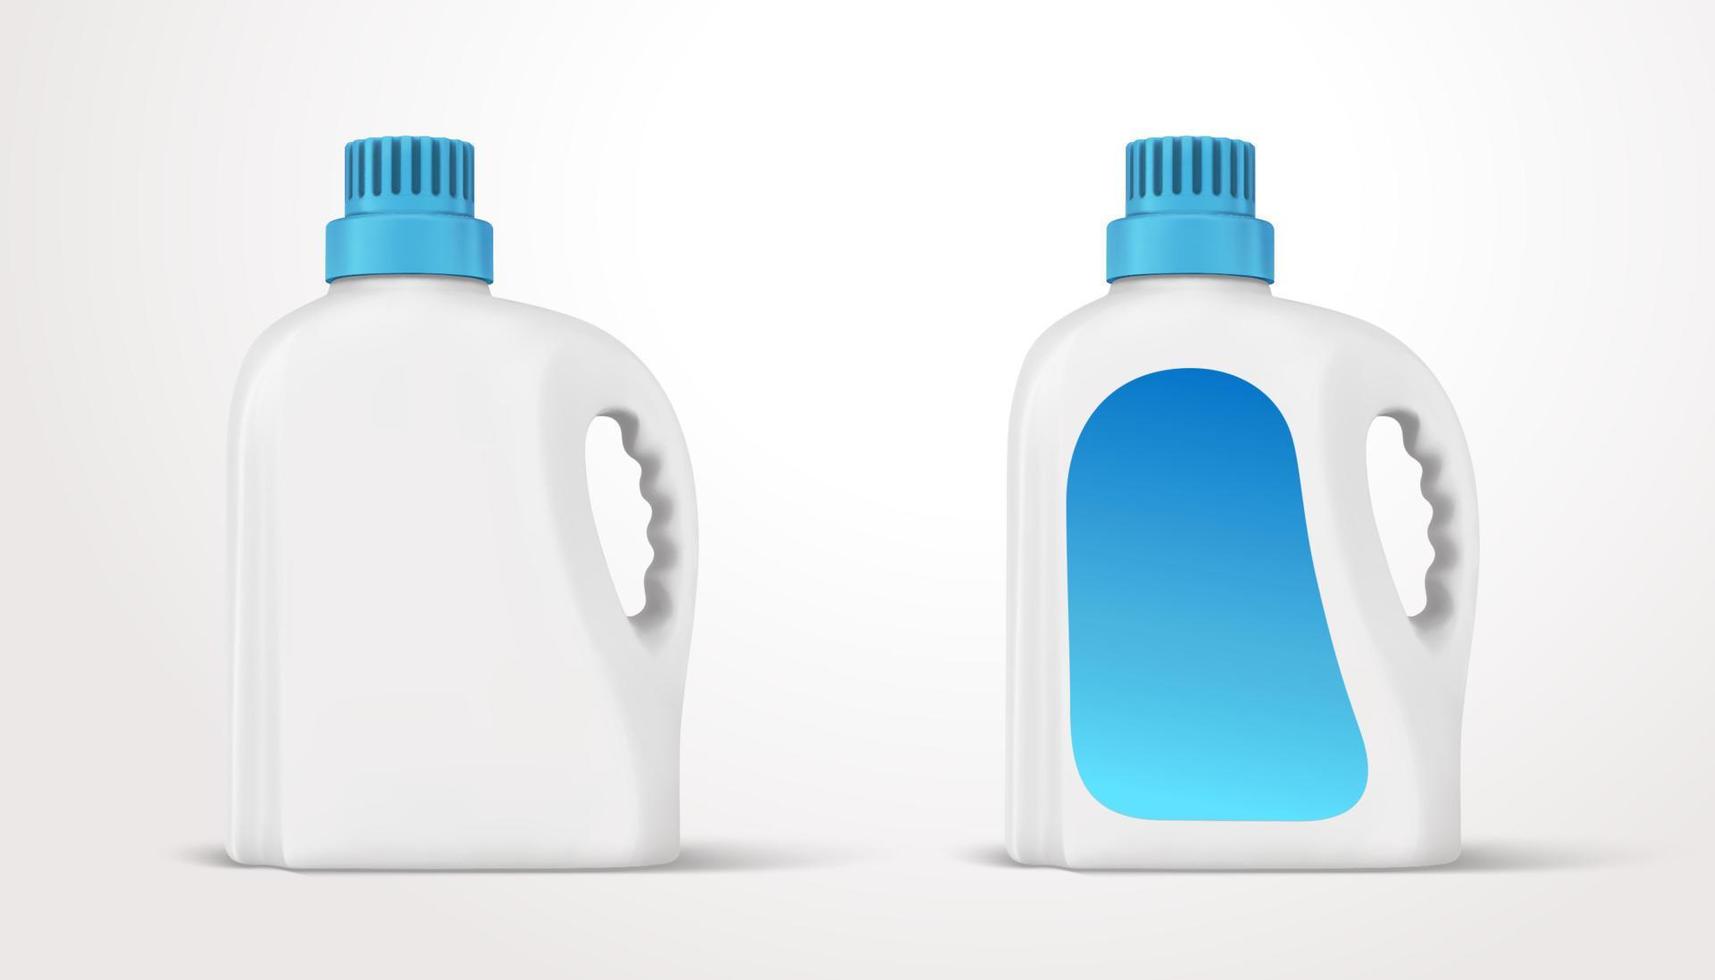 3d illustration of a plastic bottle set with handle and screw cap. Floor cleaner or liquid detergent package template isolated on white background. vector